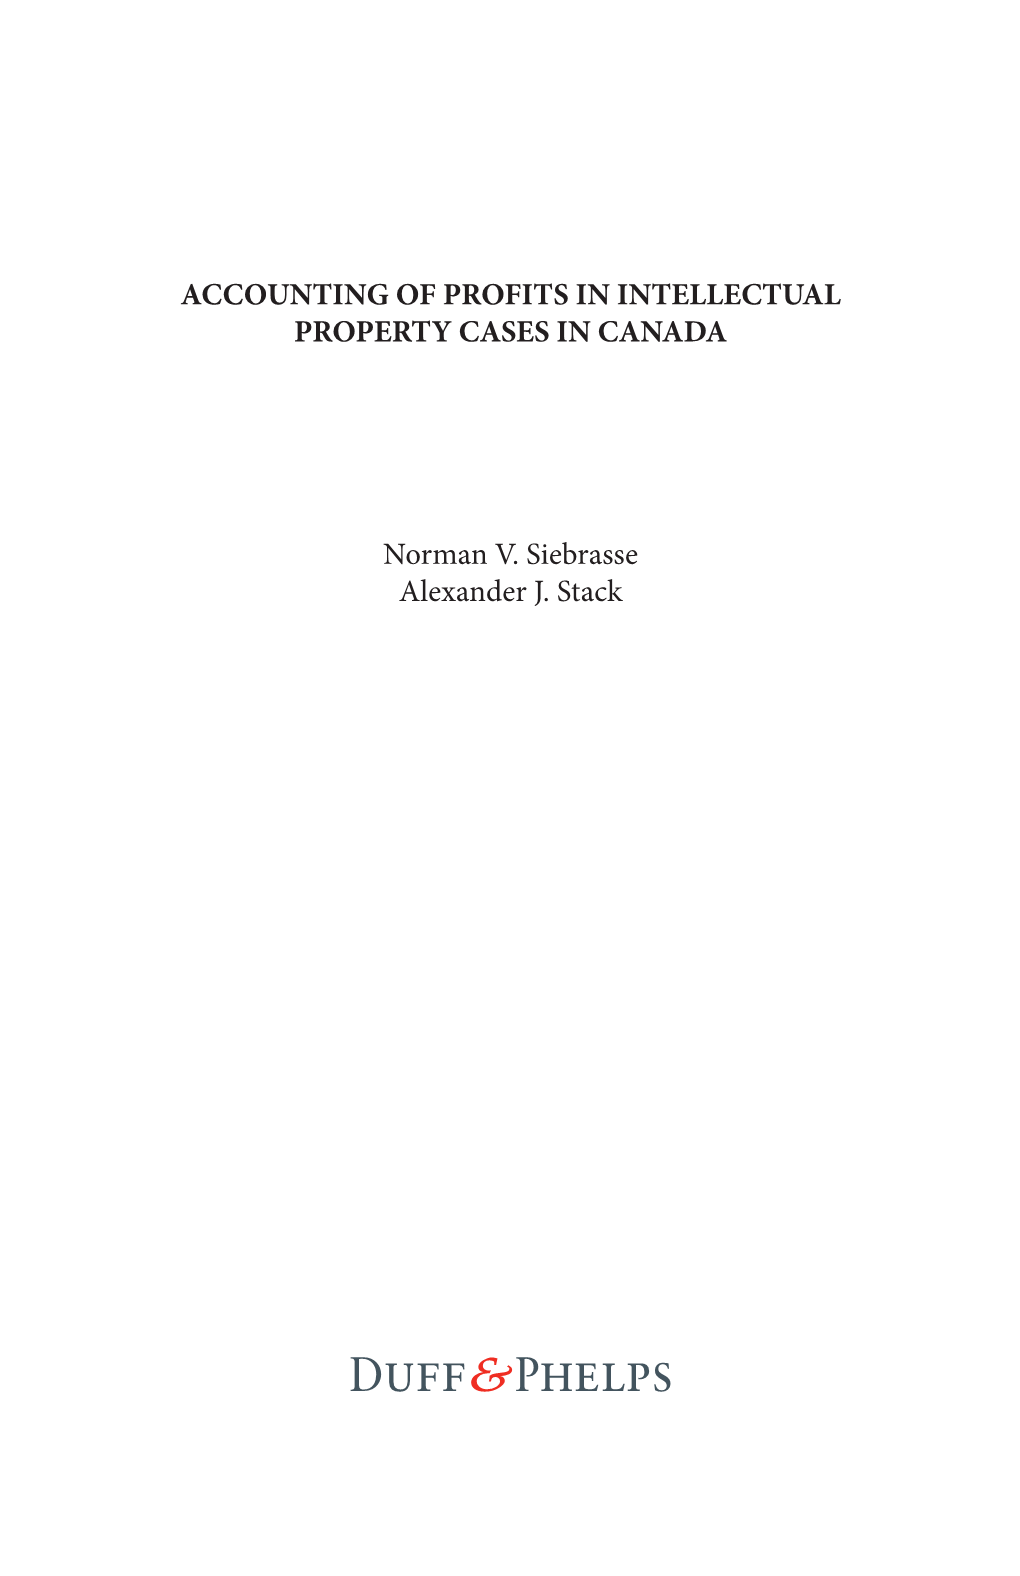 Accounting of Profits Calculations in Intellectual Property Cases in Canada.Pdf